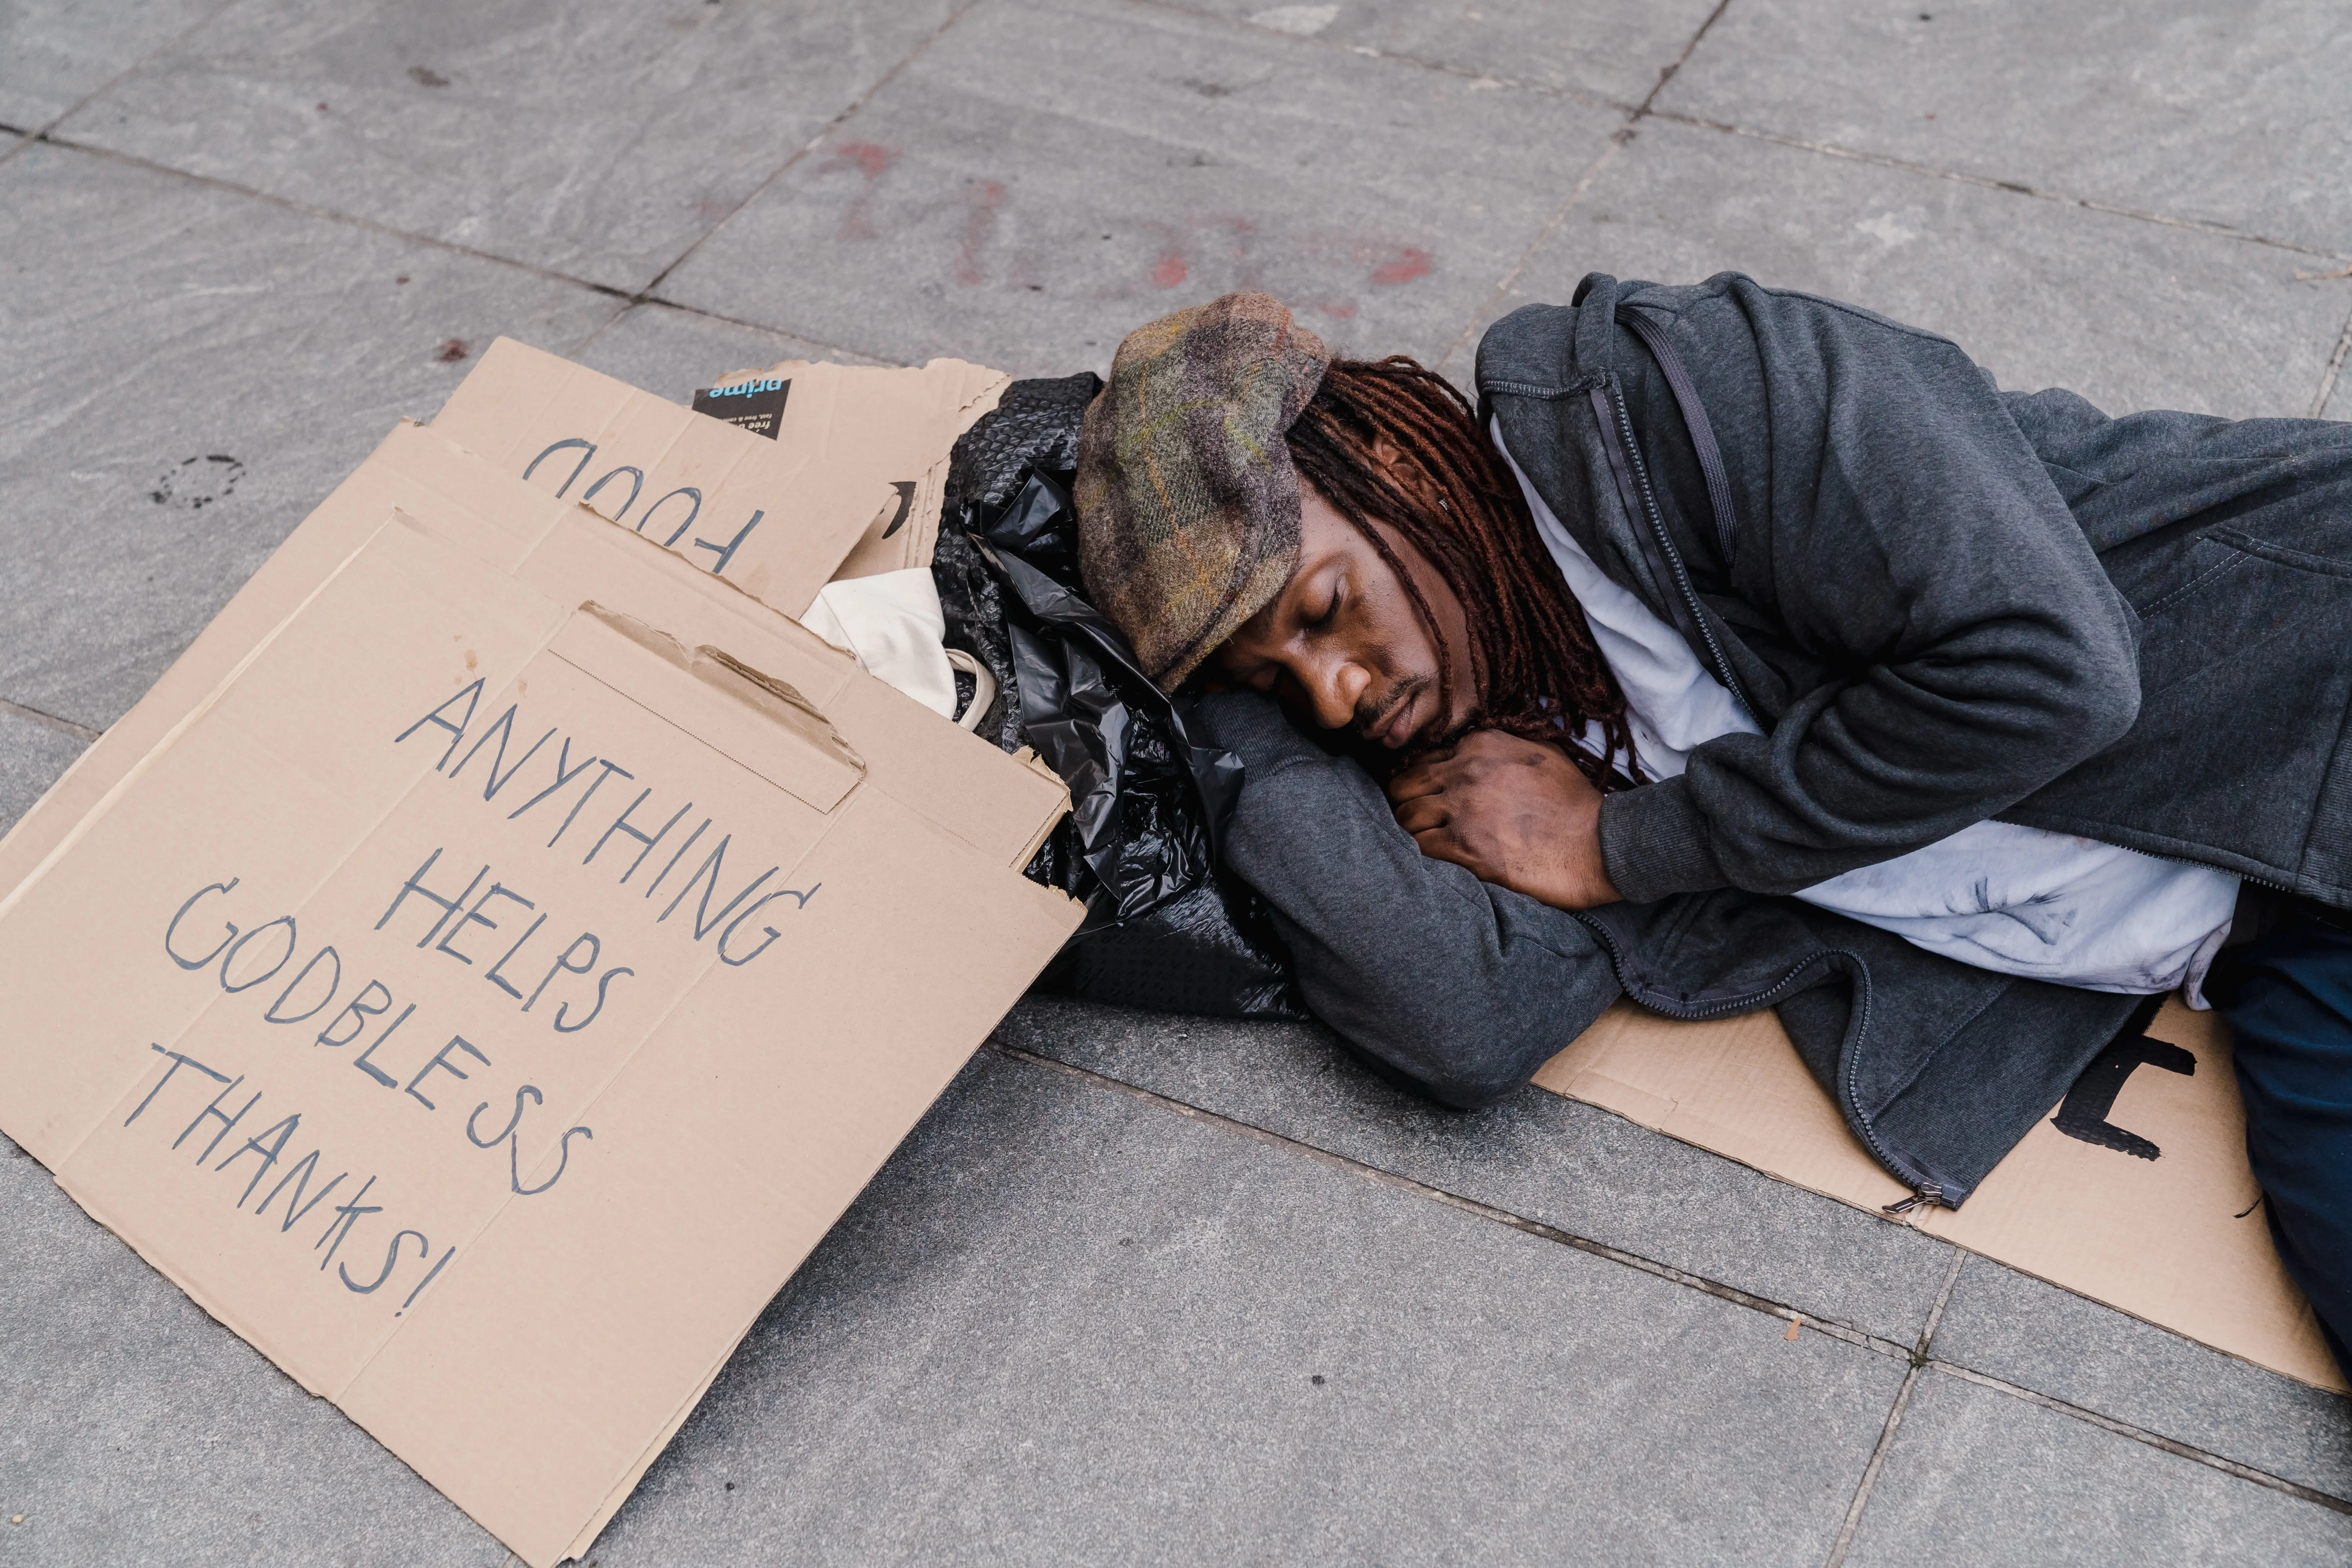 HOMELESSNESS IN THE UNITED STATES ESSAY